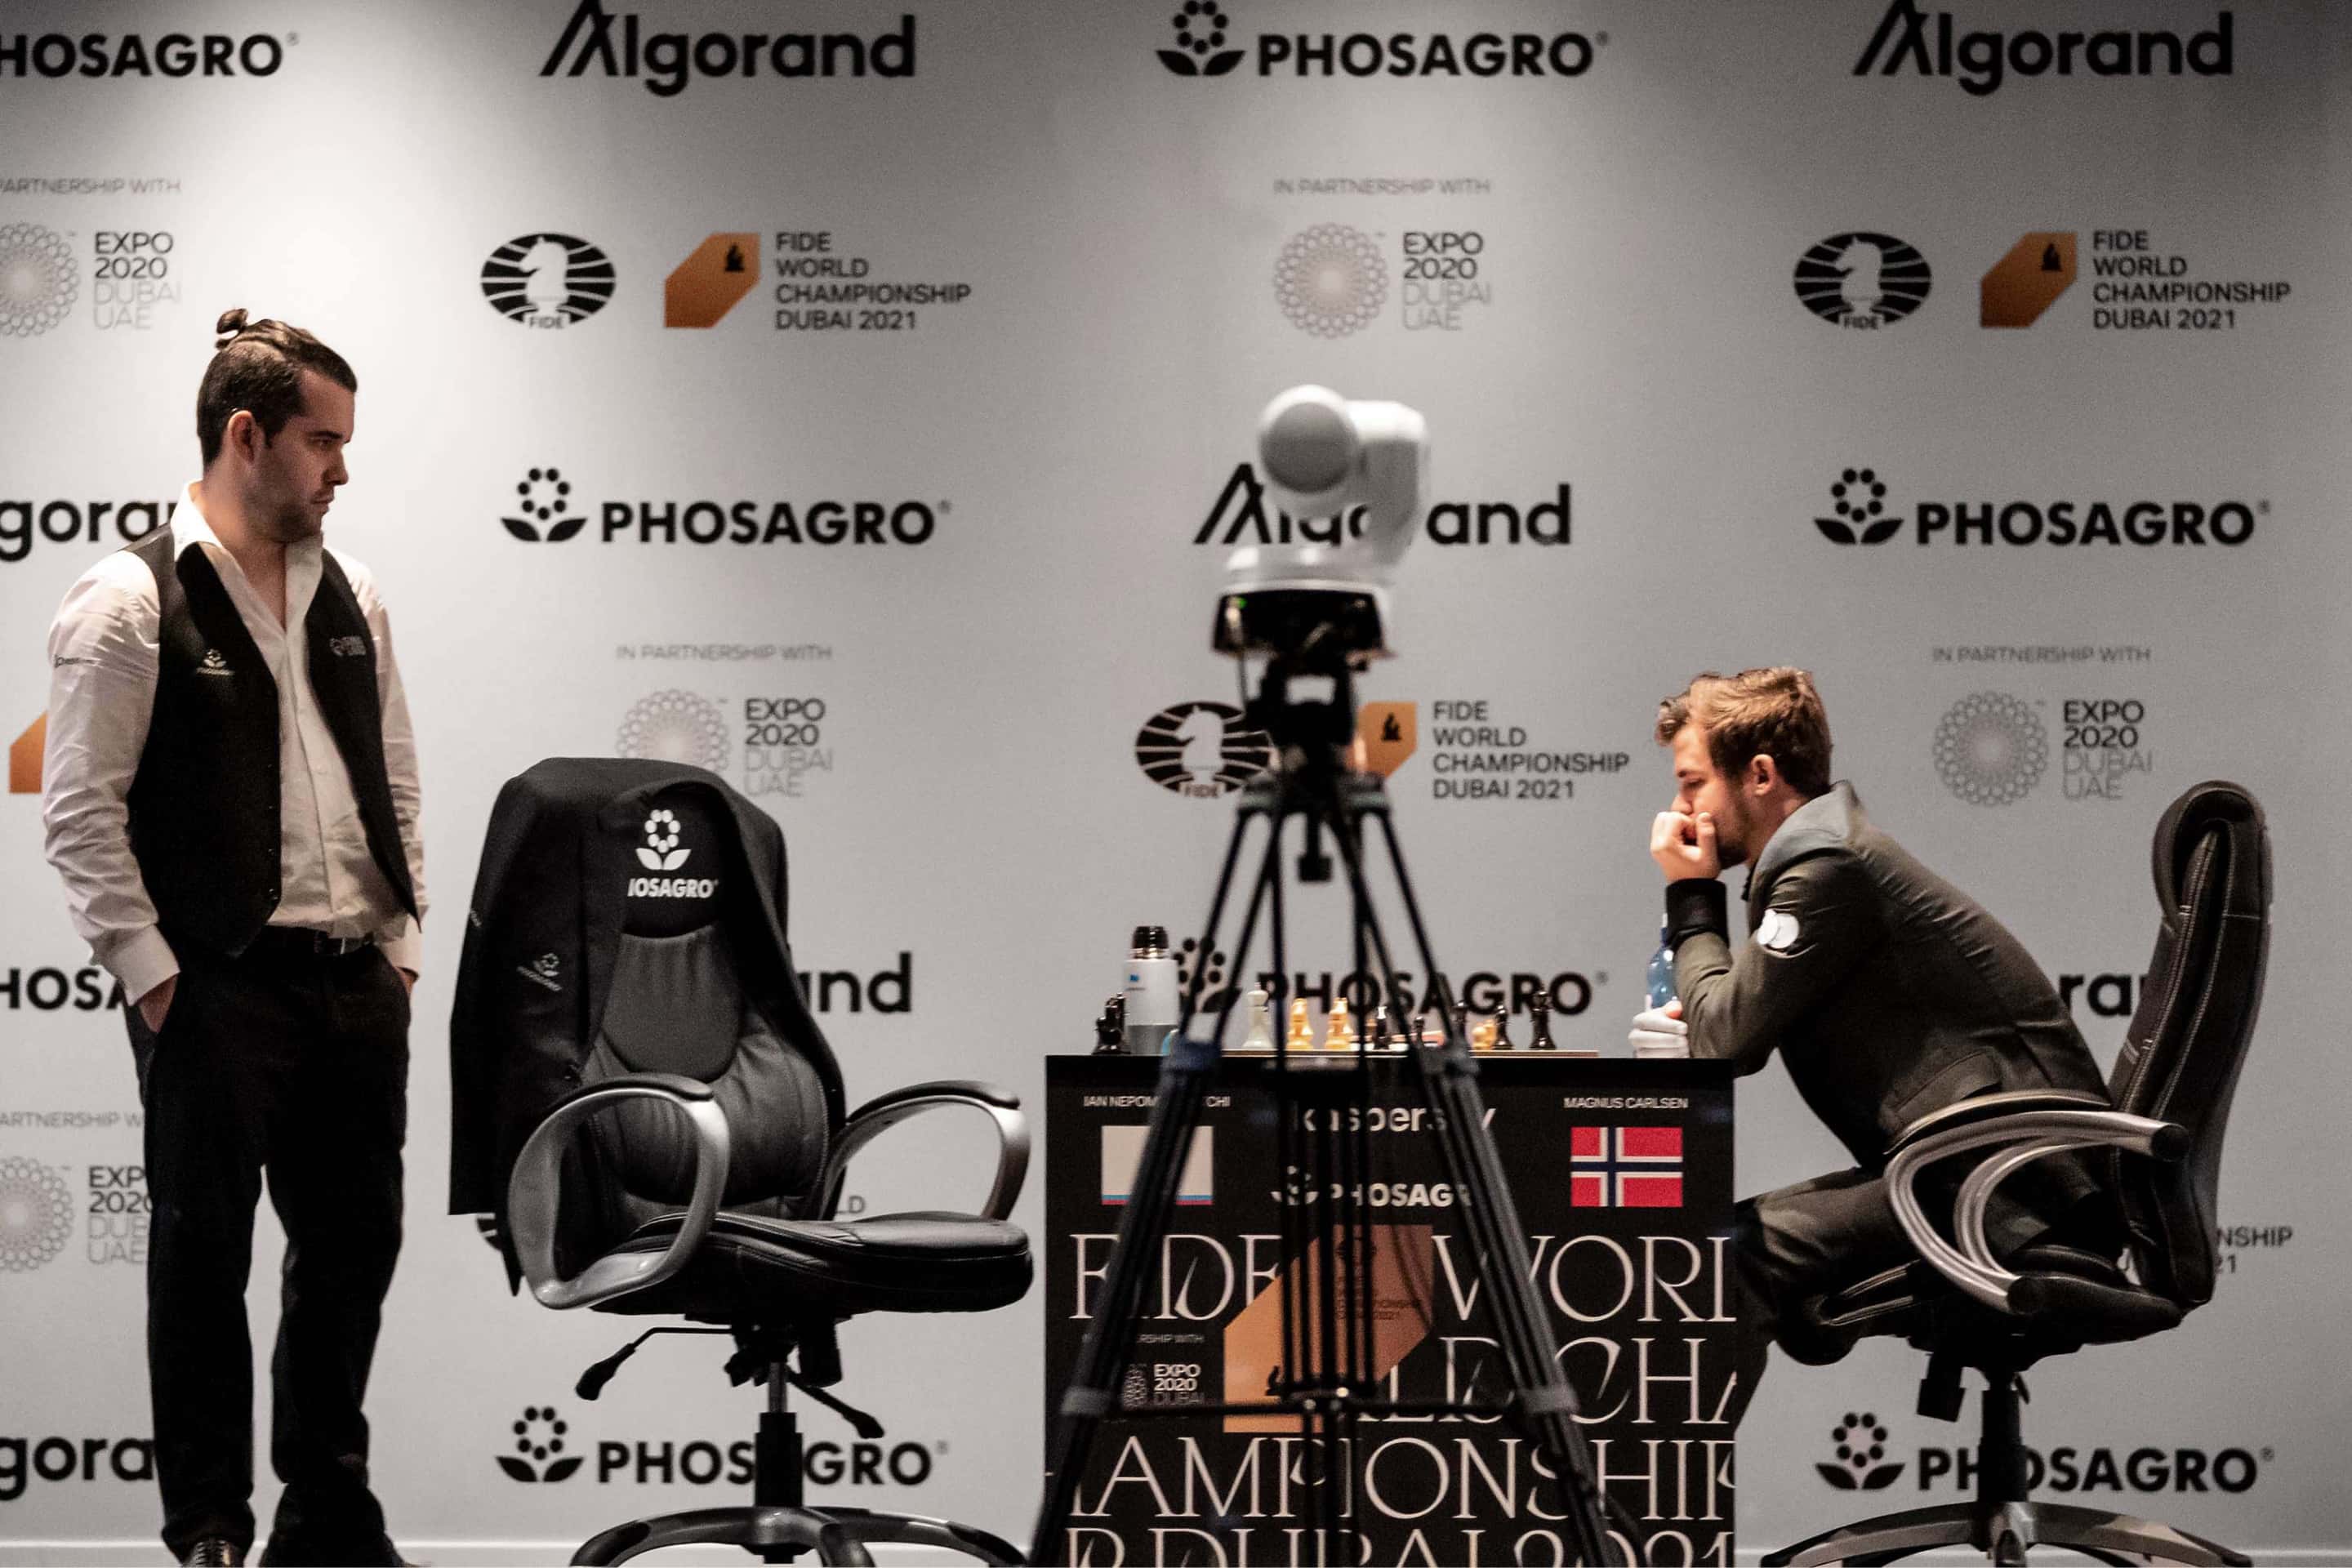 The 2021 FIDE World Chess Championship is a biannual event that came at a unique moment, as new digital phenomena brought millions of new followers to this millenary mental sport.
